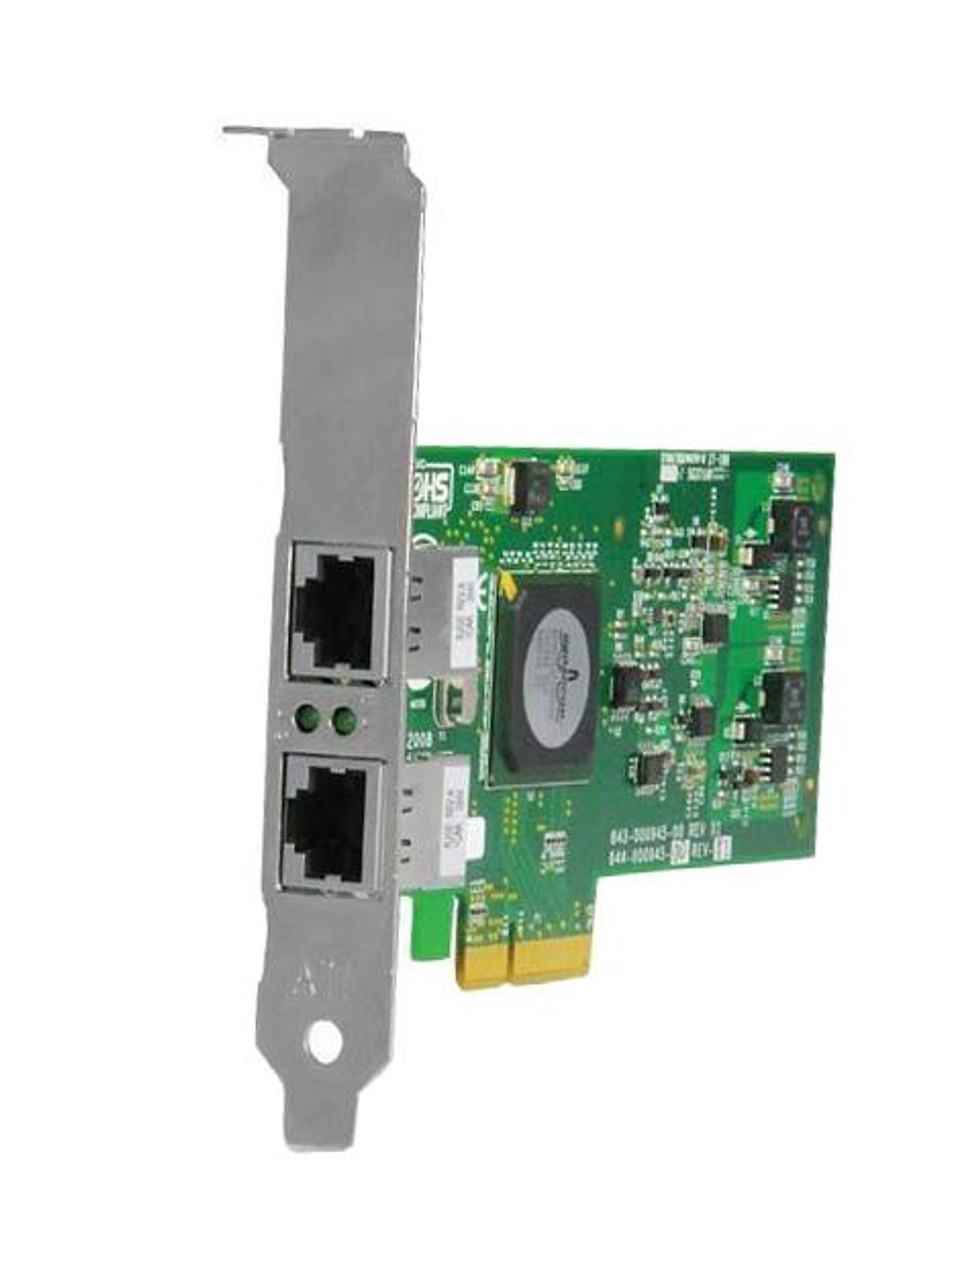 AT-2973T-001 Allied Telesis Dual-Ports RJ-45 1Gbps 10Base-T/100Base-TX/1000Base-T Gigabit Ethernet PCI Express x4 Low Profile Network Adapter